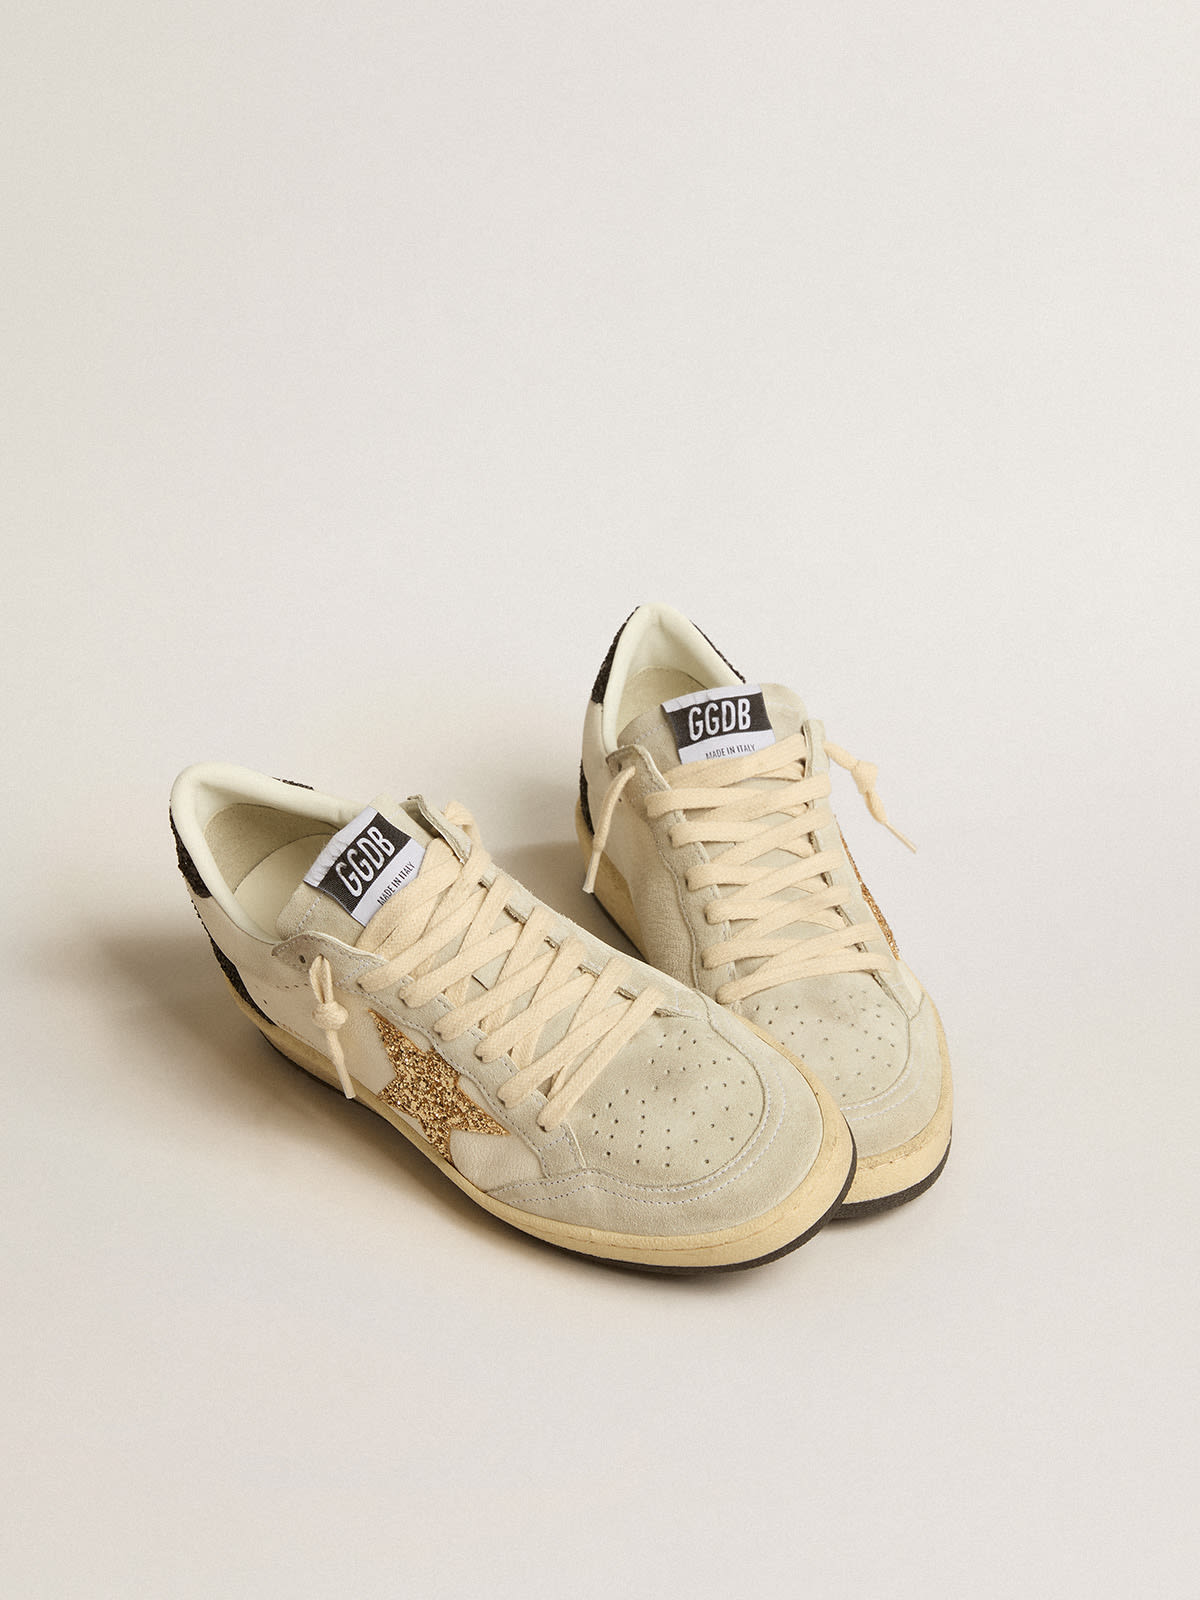 Golden Goose - Ball Star LTD in nappa leather and suede with glitter star and black heel tab in 